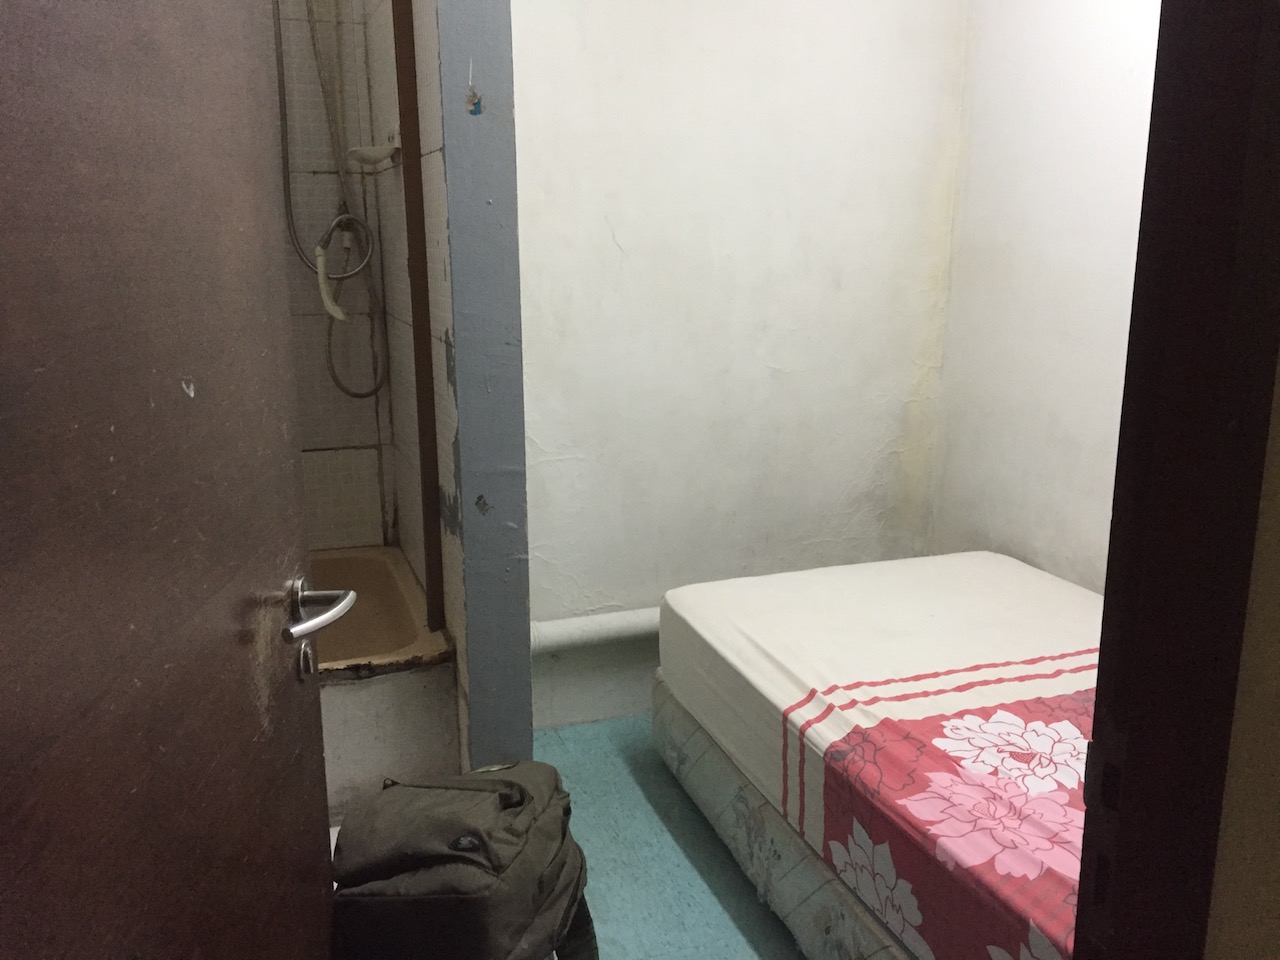 One Night in the Worst Room in Singapore, According to TripAdvisor